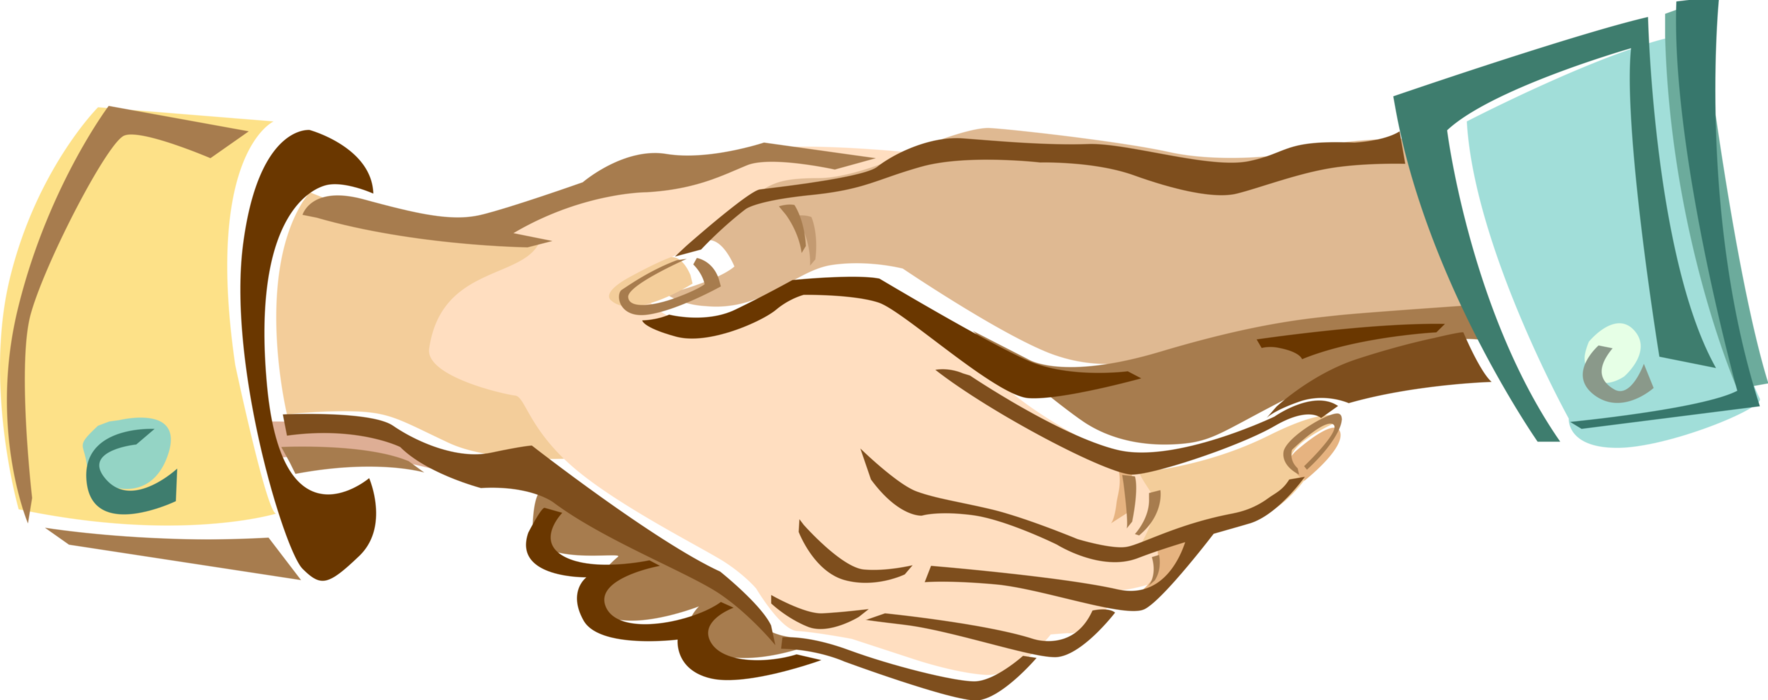 Vector Illustration of Shaking Hands in Handshake of Introduction Greeting or Agreement